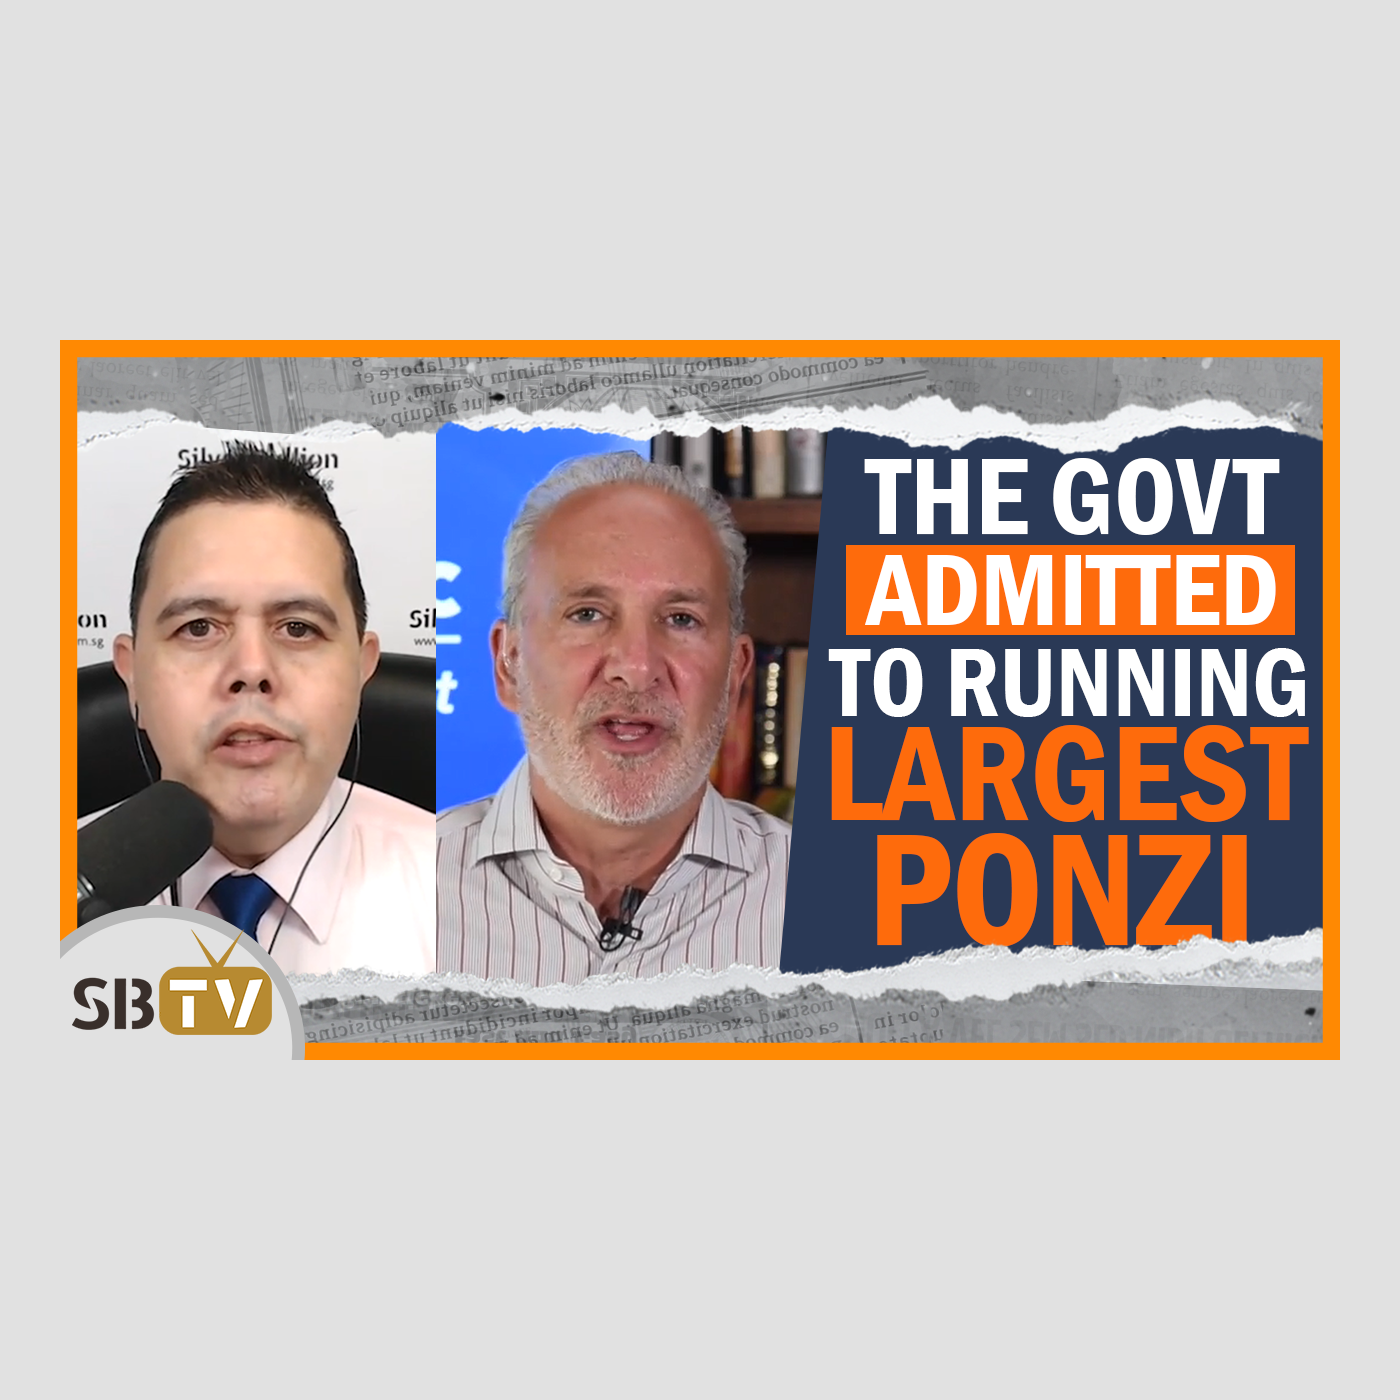 186 Peter Schiff - The Government Admitted to Running the World's Largest Ponzi Scheme